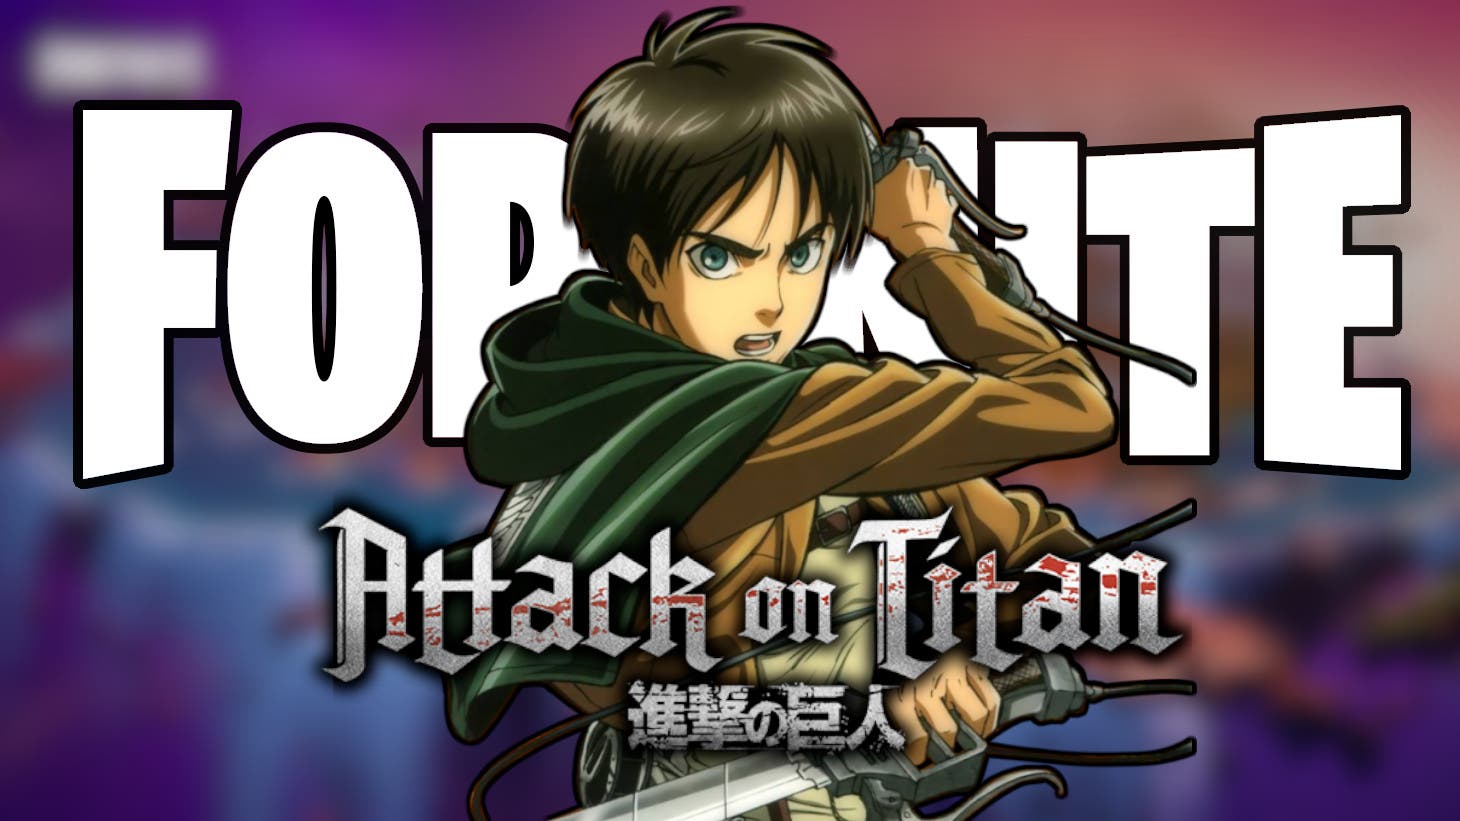 Fortnite X Attack on Titan leaked!  This will be the expected crossover and the first skin of season 2